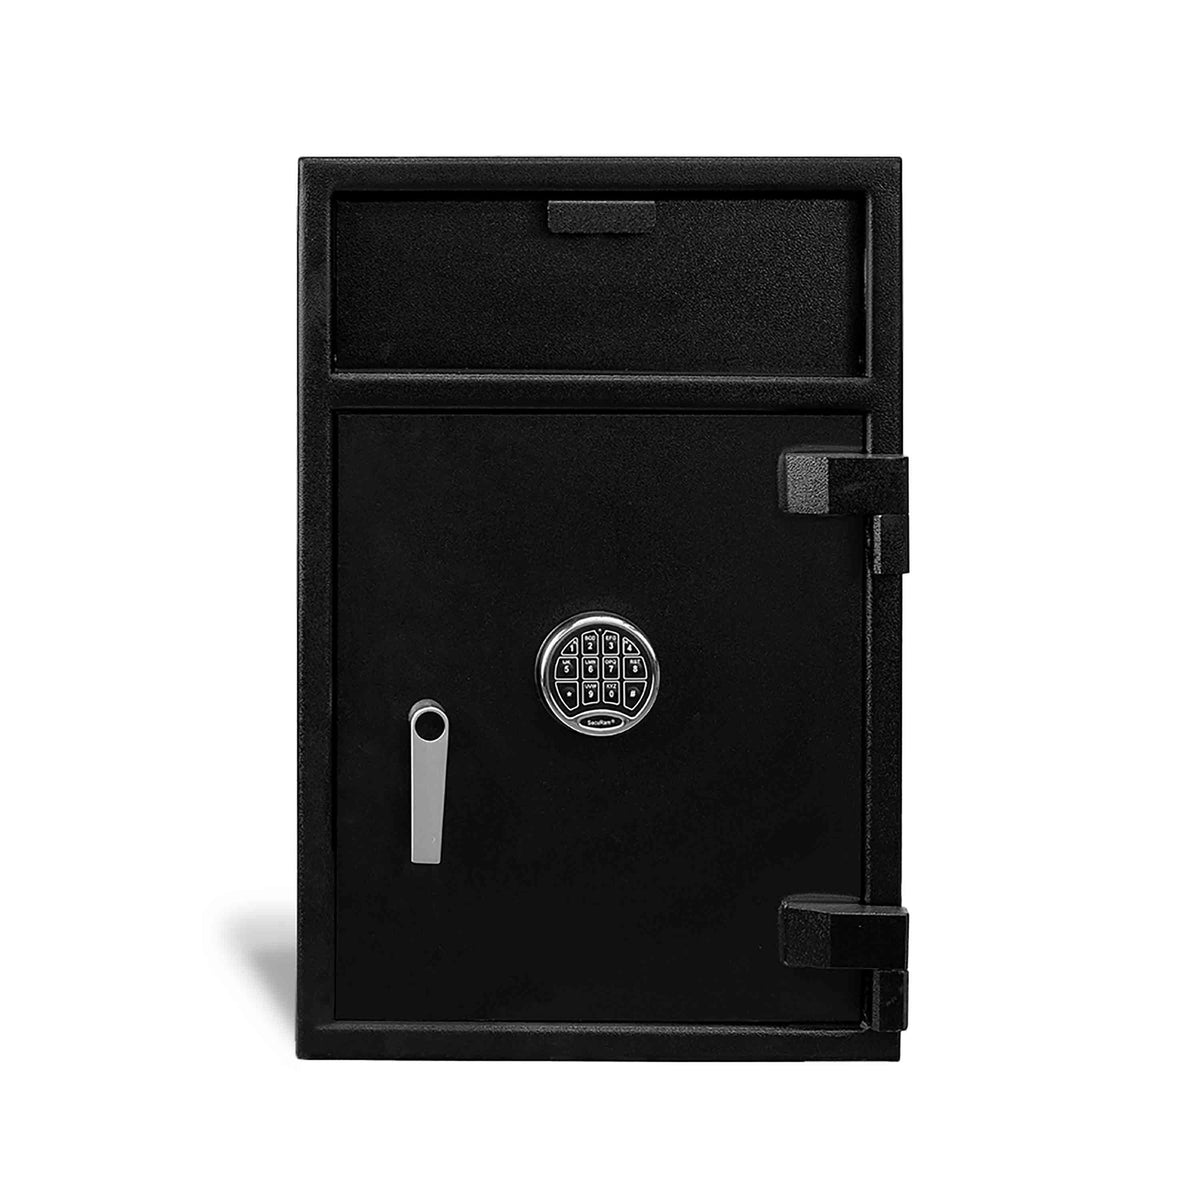 Pacific Safe FL3020MK1 Front Load Depository Safe with Internal Compartment Front